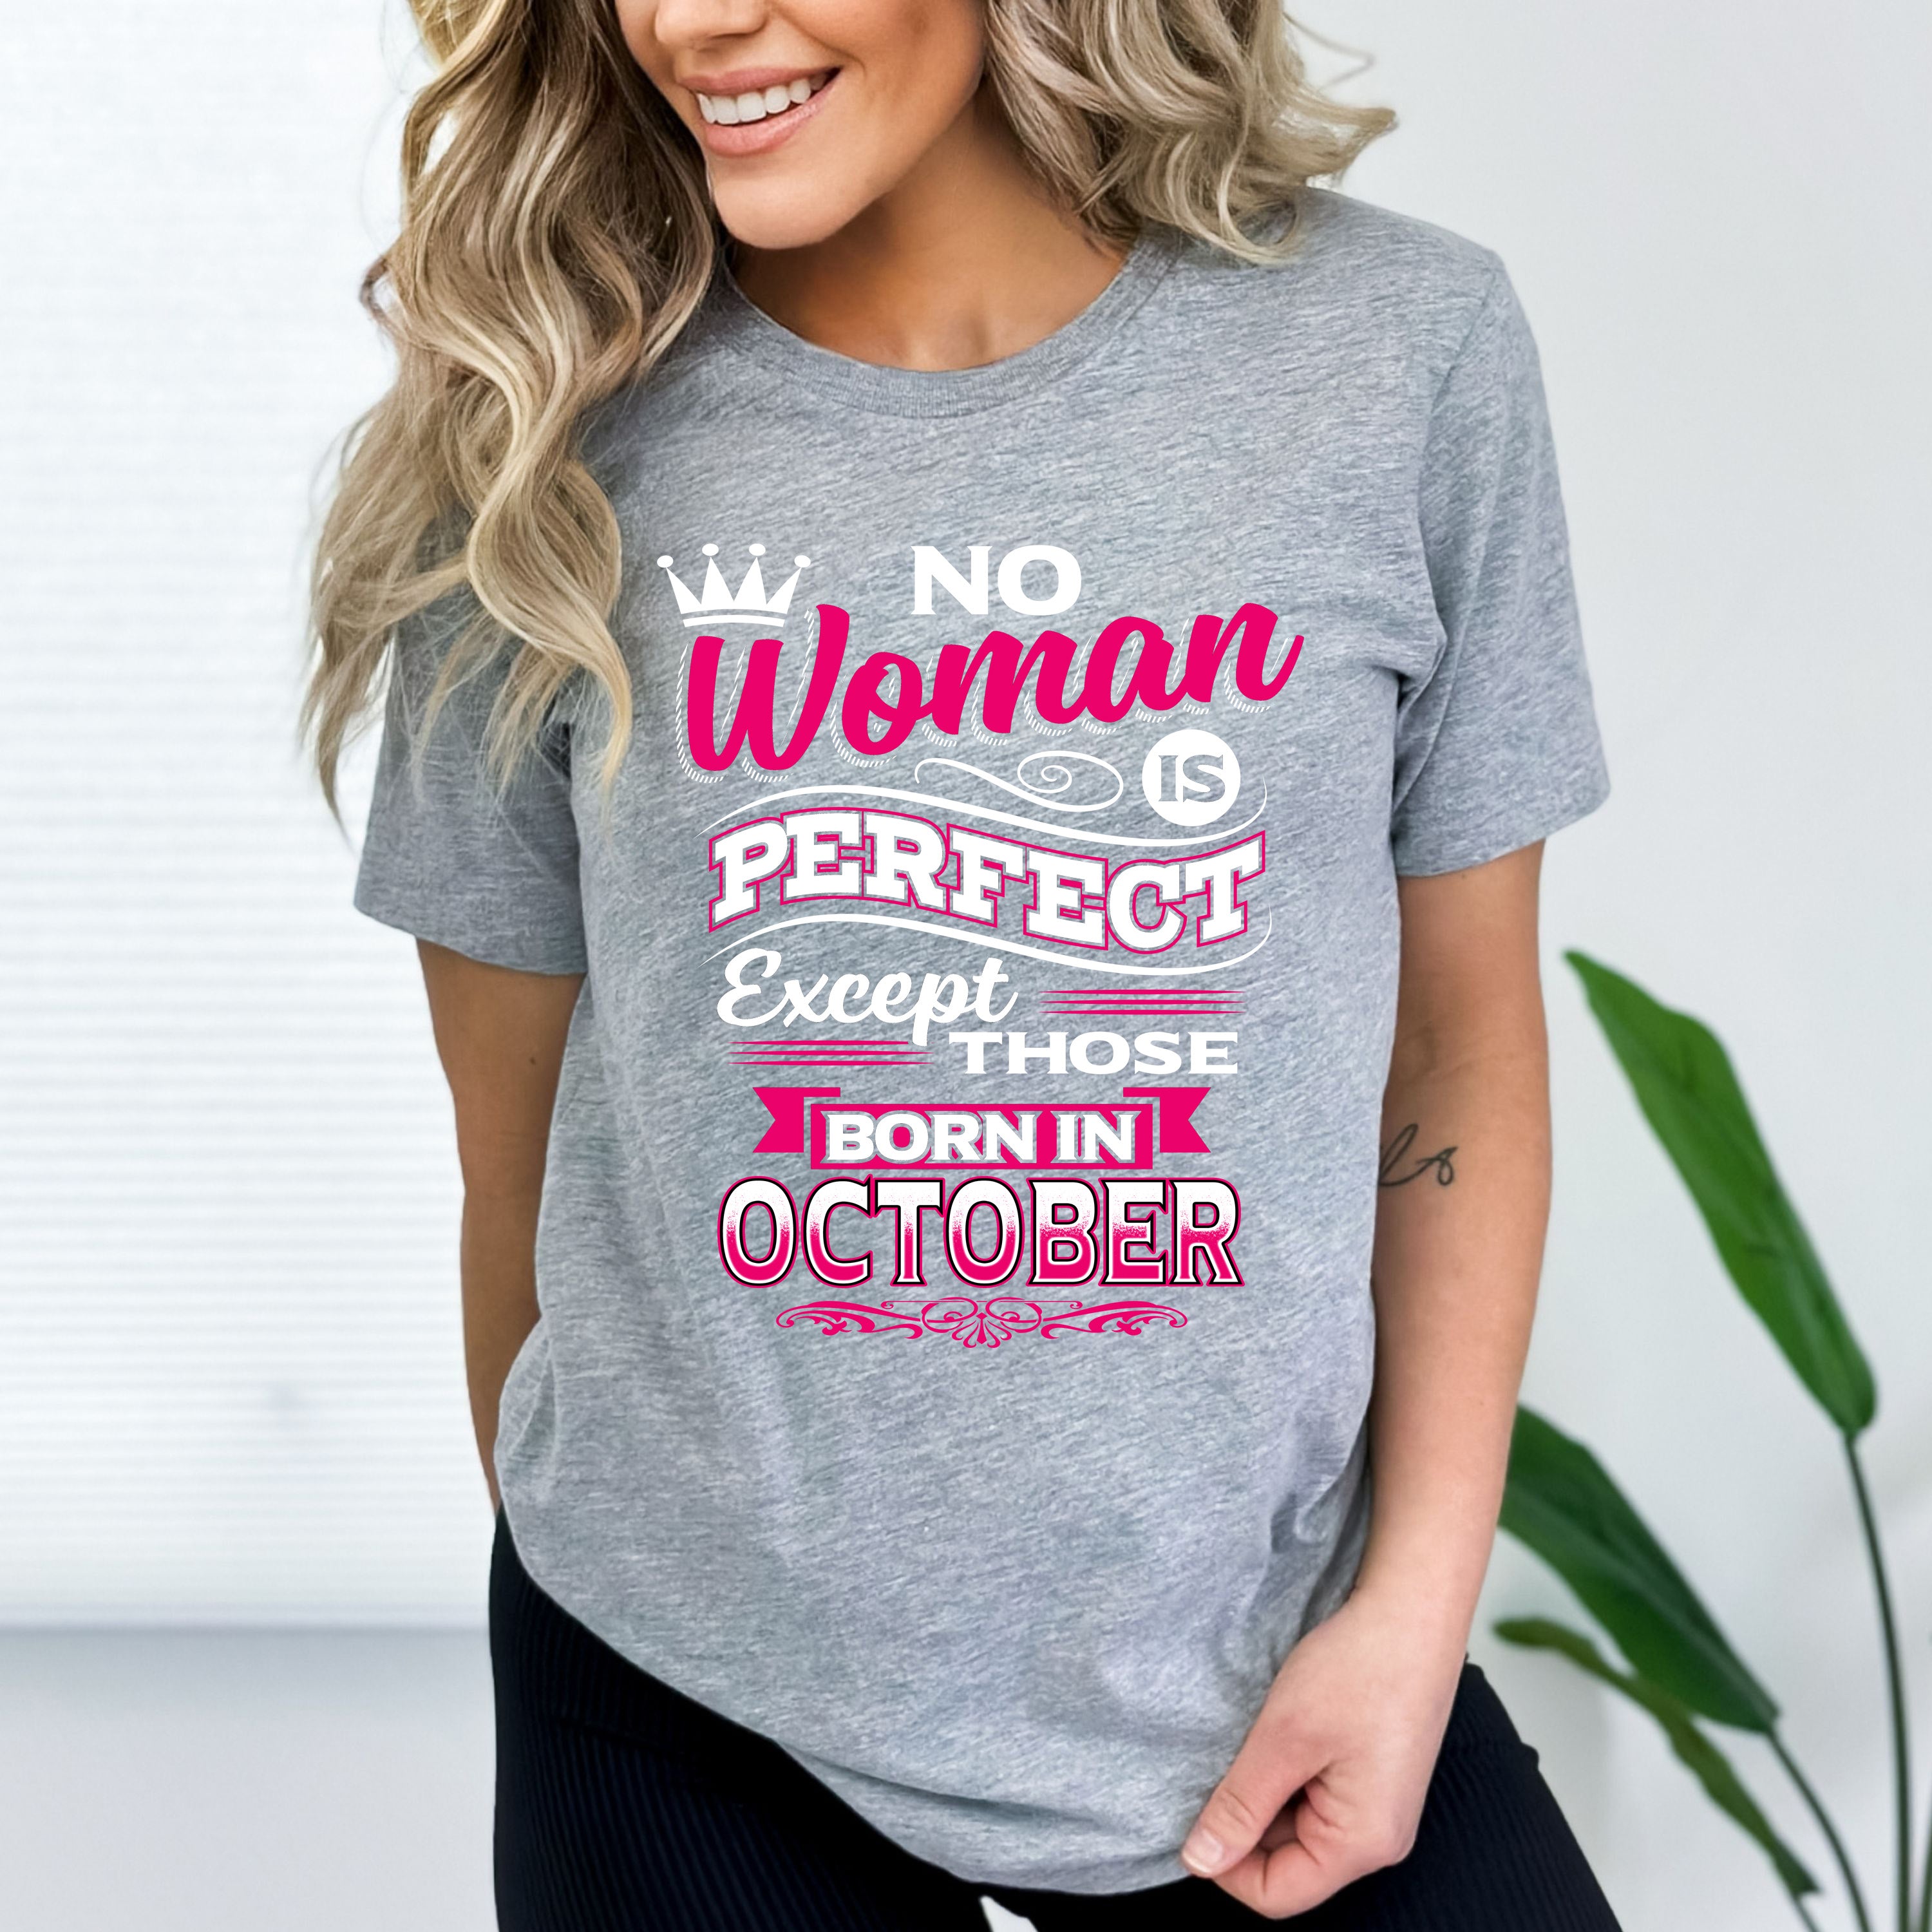 "No Woman Is Perfect Except Those Born In October"- Grey & Black